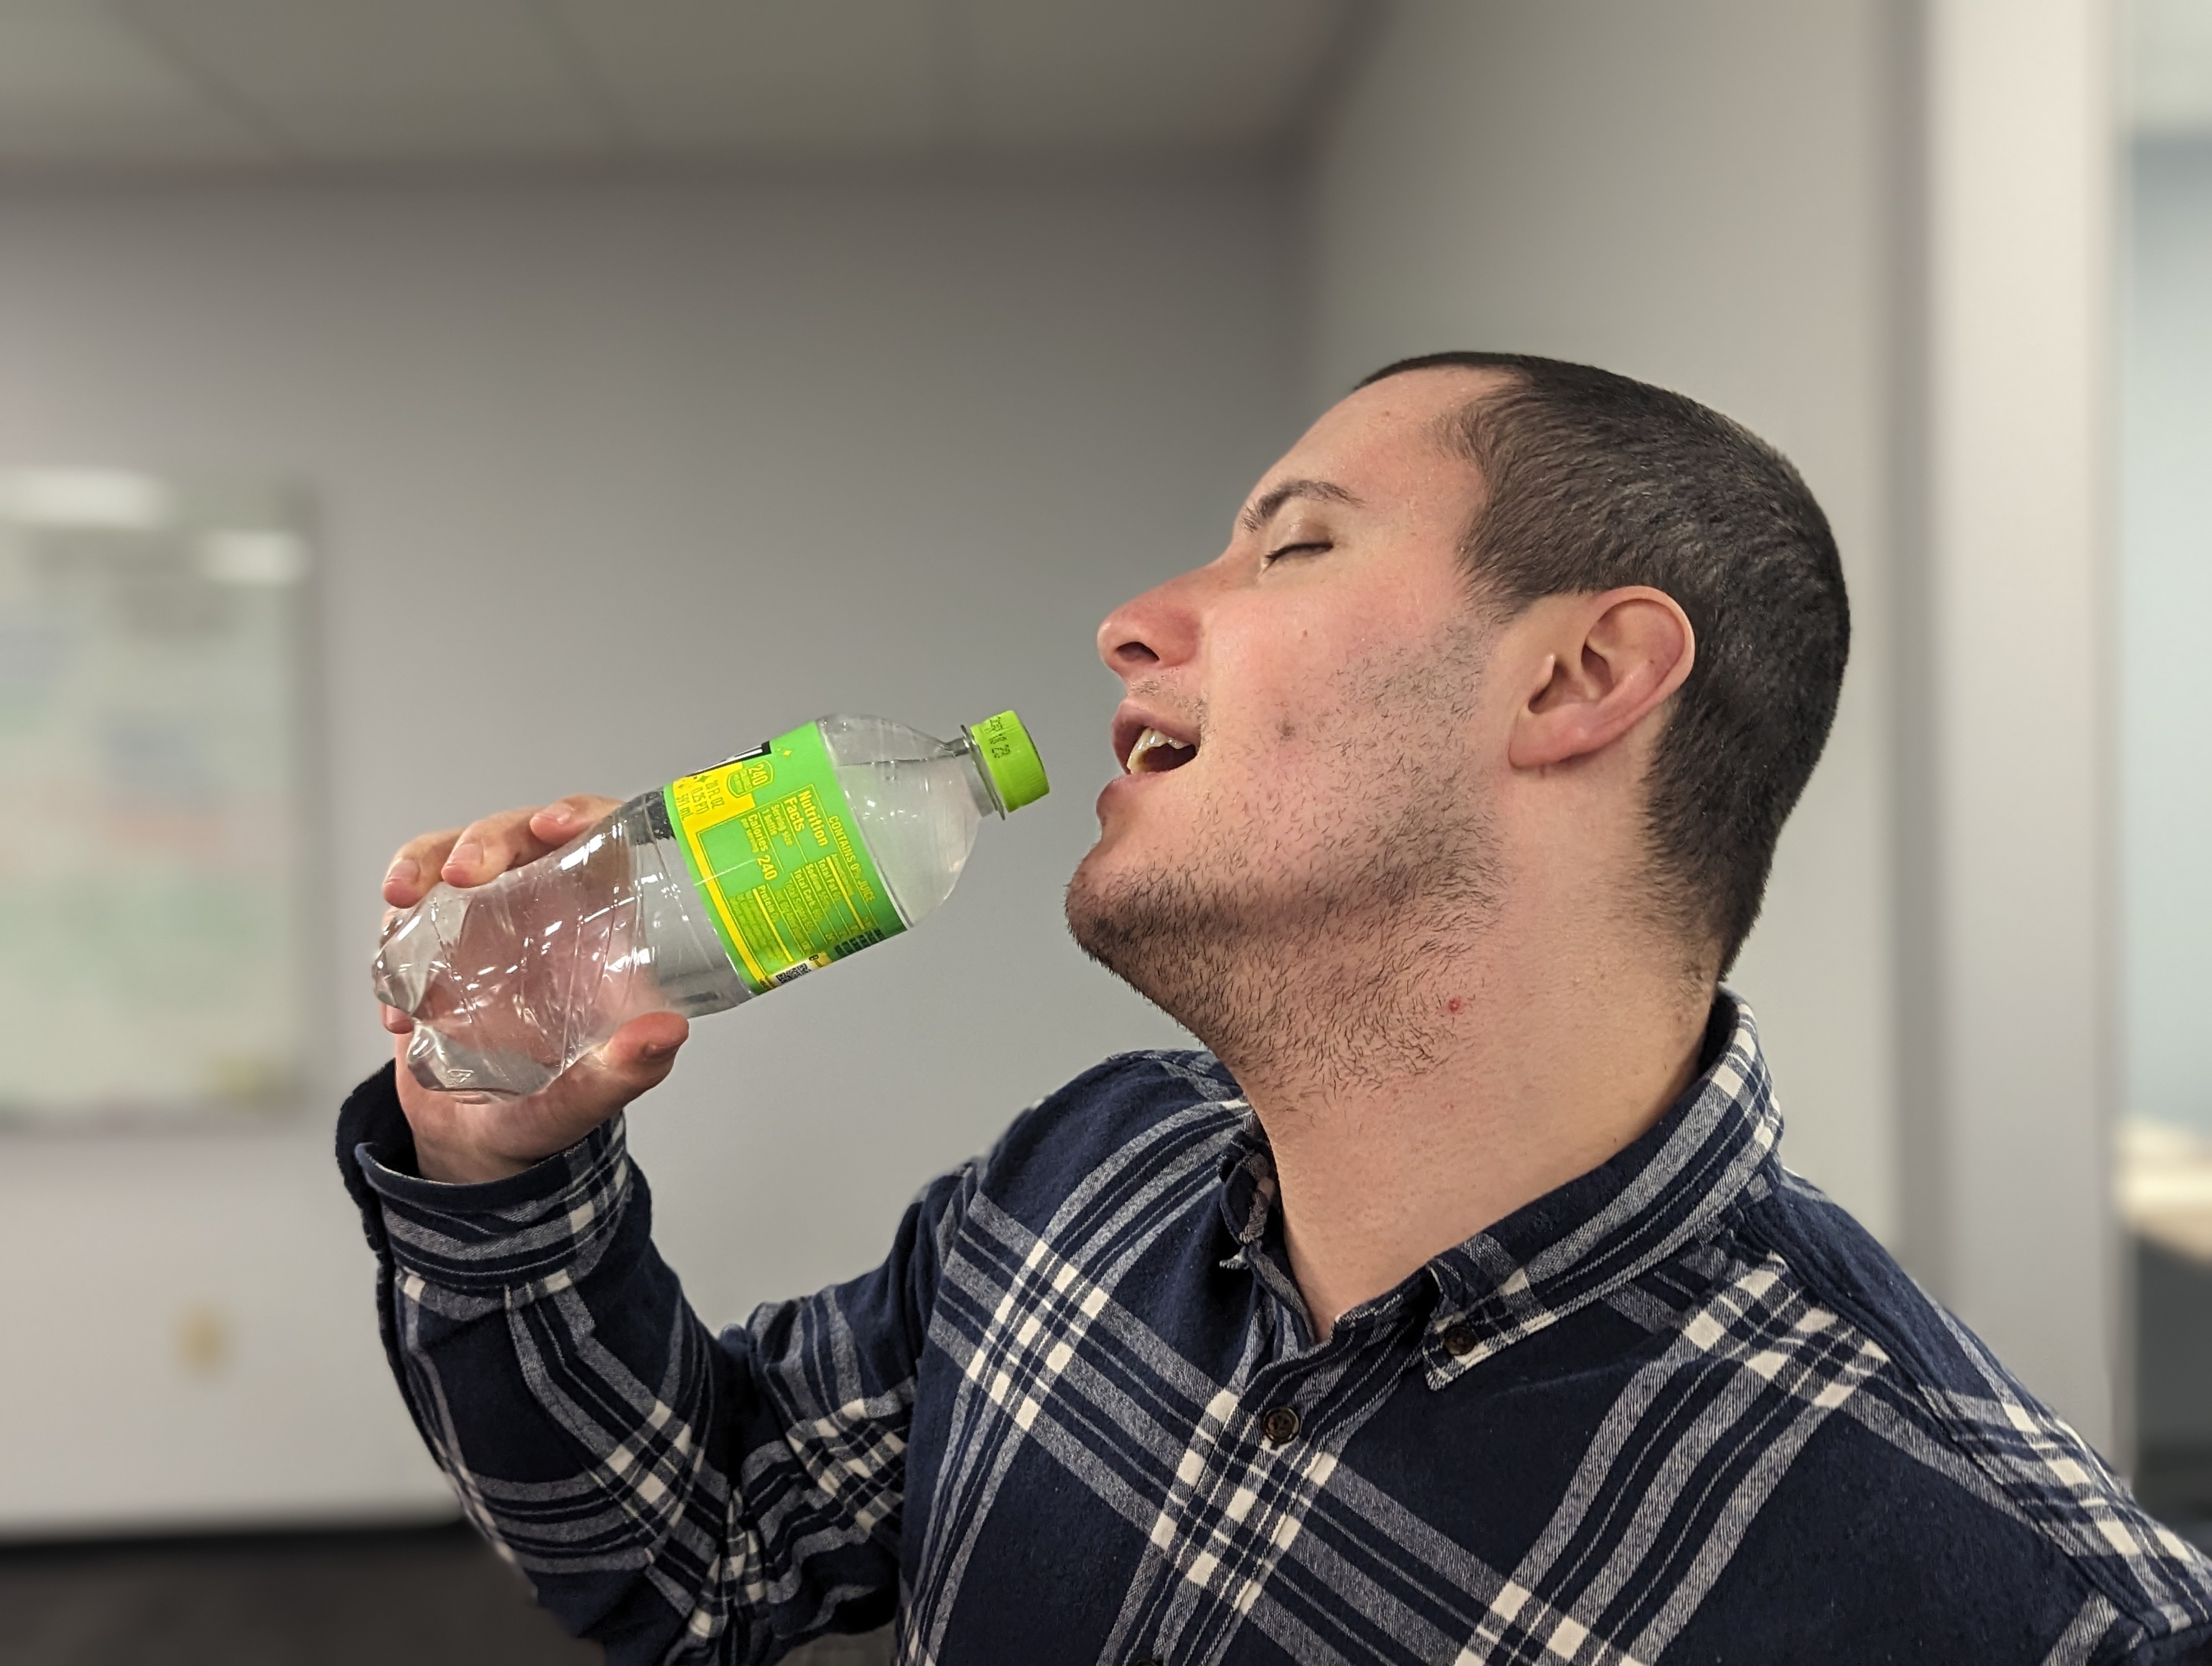 We Taste-Tested Starry And Sierra Mist To See If They're Actually